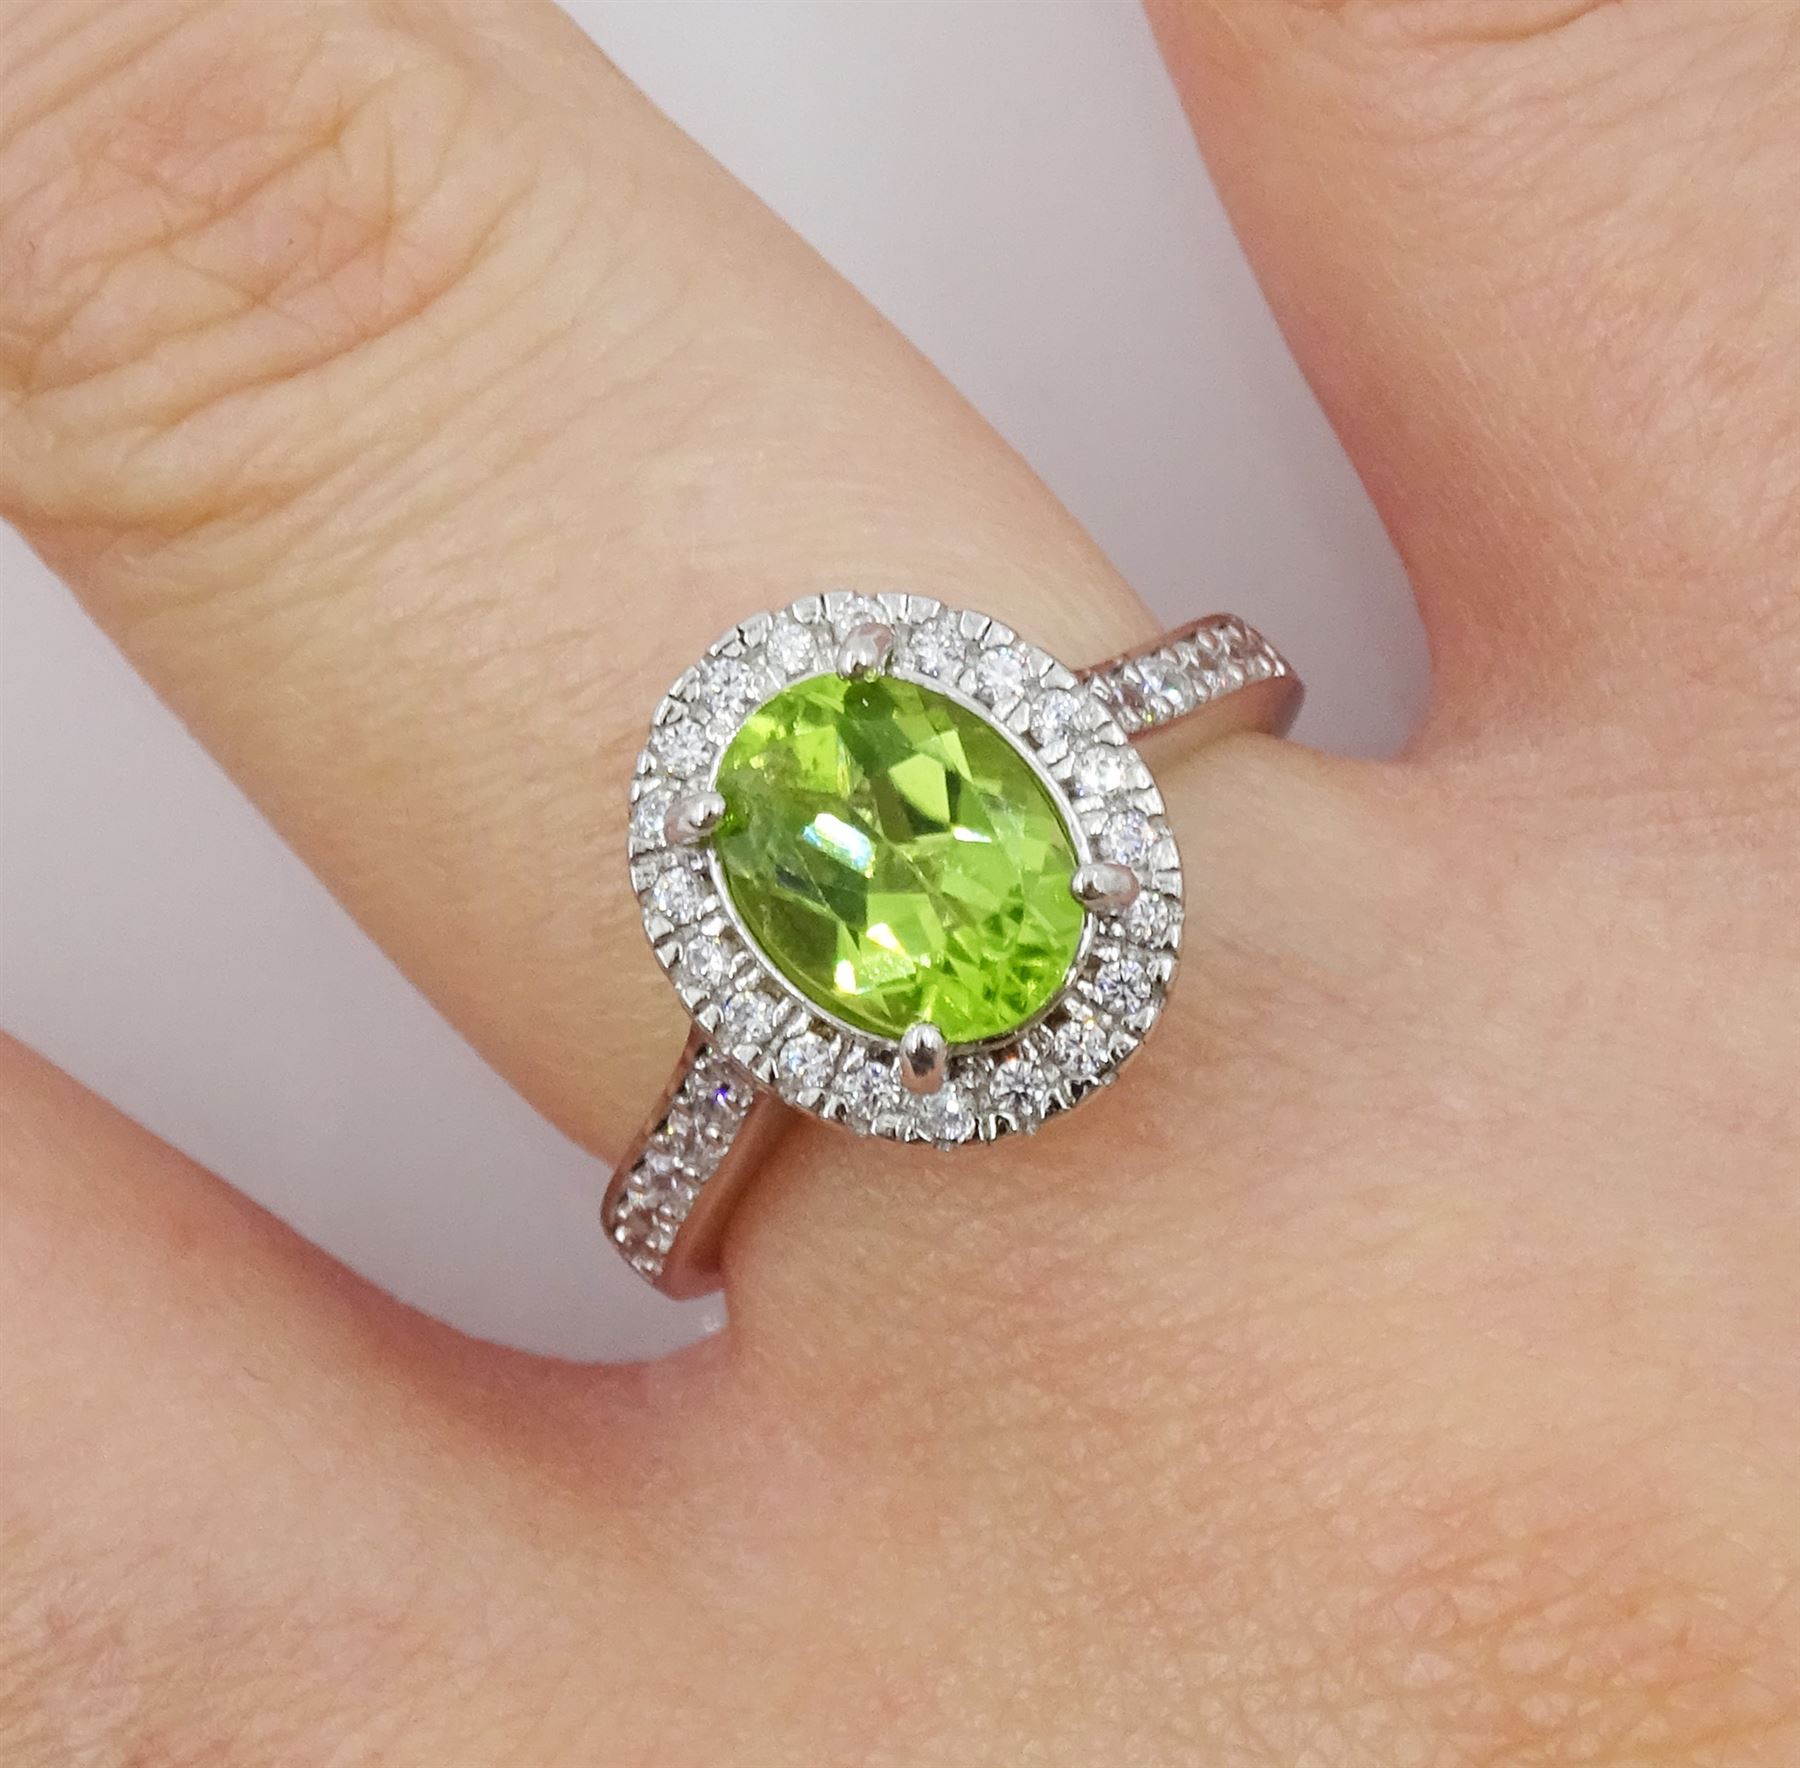 Silver oval peridot and cubic zirconia ring - Image 2 of 4